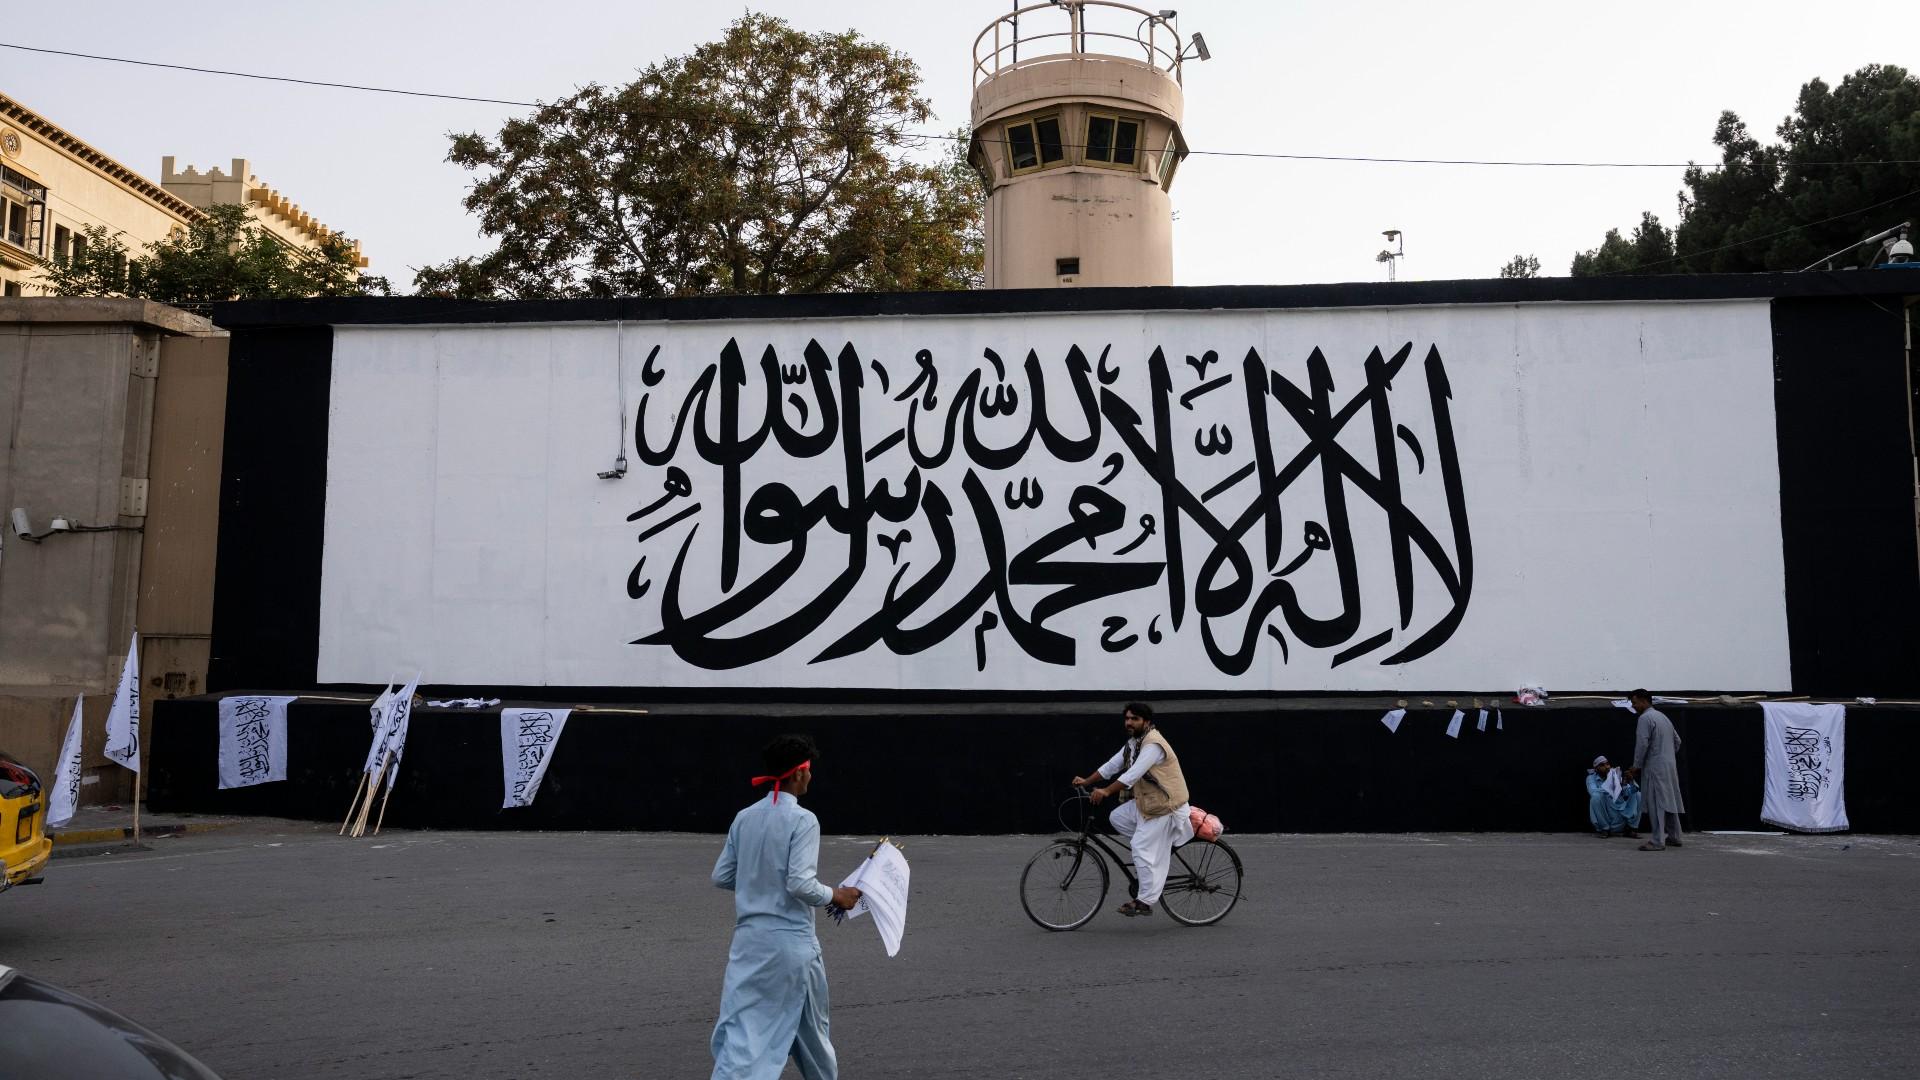 The iconic Taliban flag is painted on a wall outside the American embassy compound in Kabul, Afghanistan, Saturday, Sept. 11, 2021. (AP Photo / Bernat Armangue)